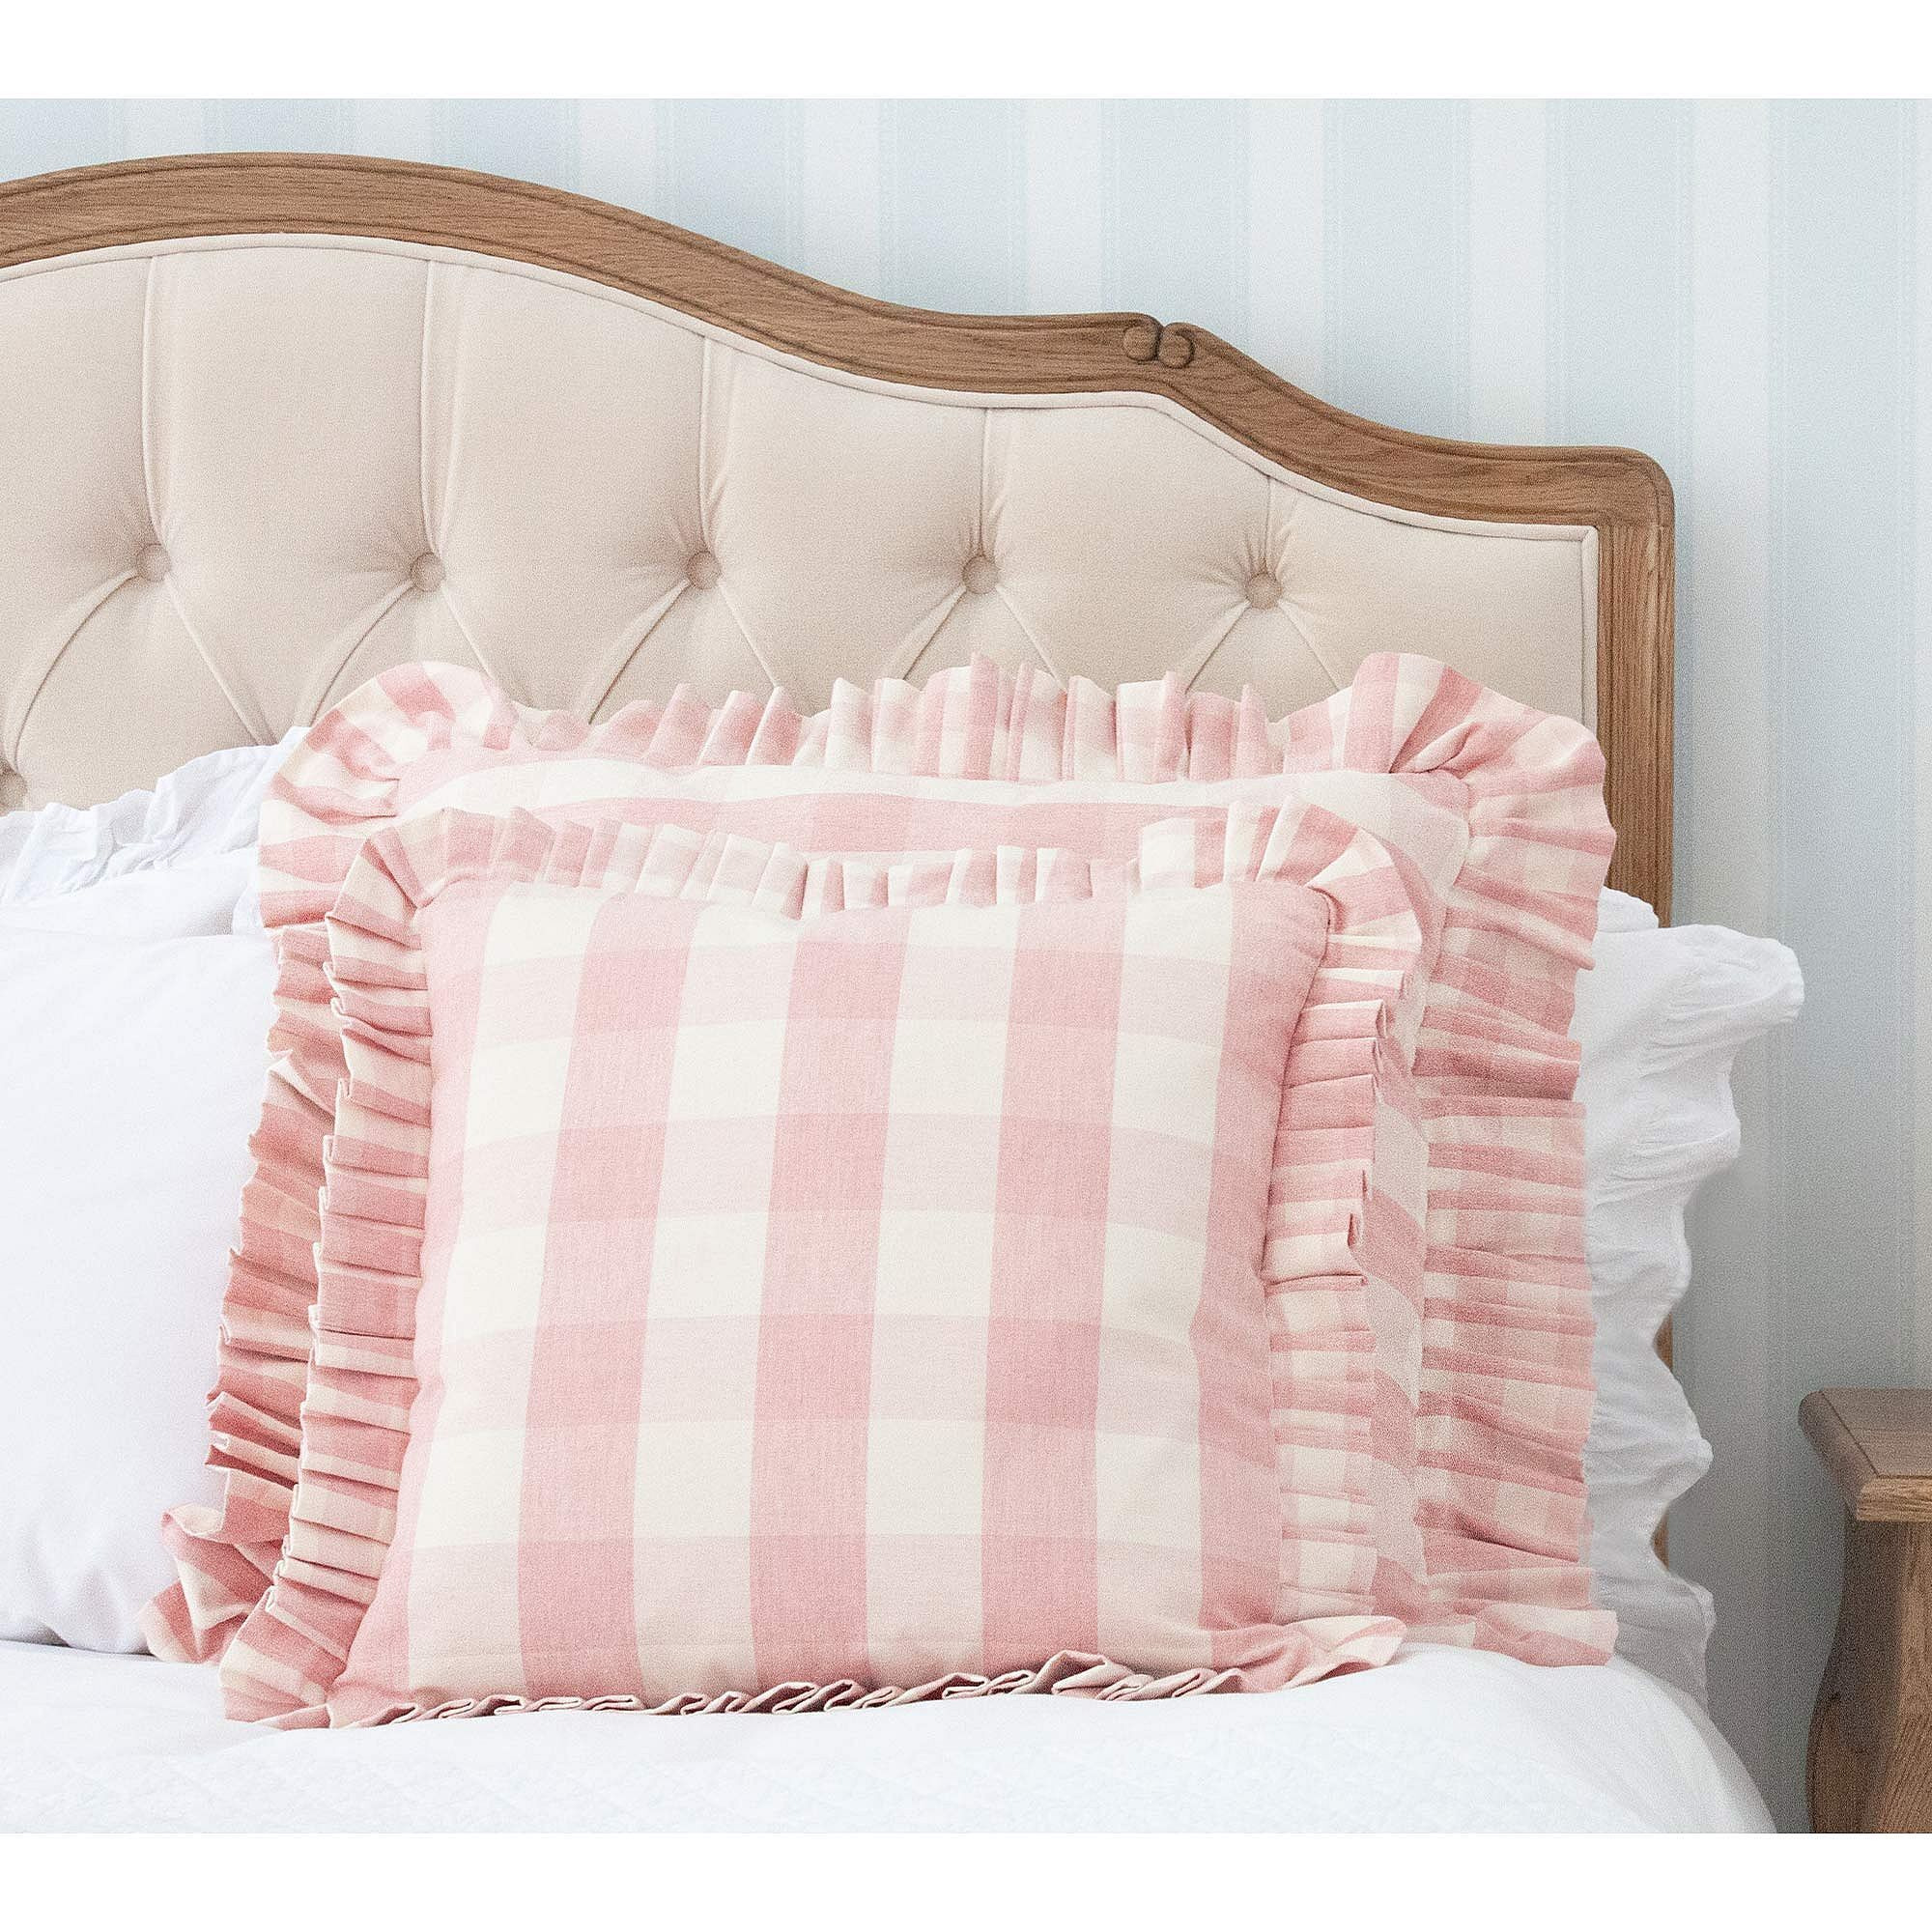 Alice Ruffle Cushion in Pale Pink  (Grande) - image 1